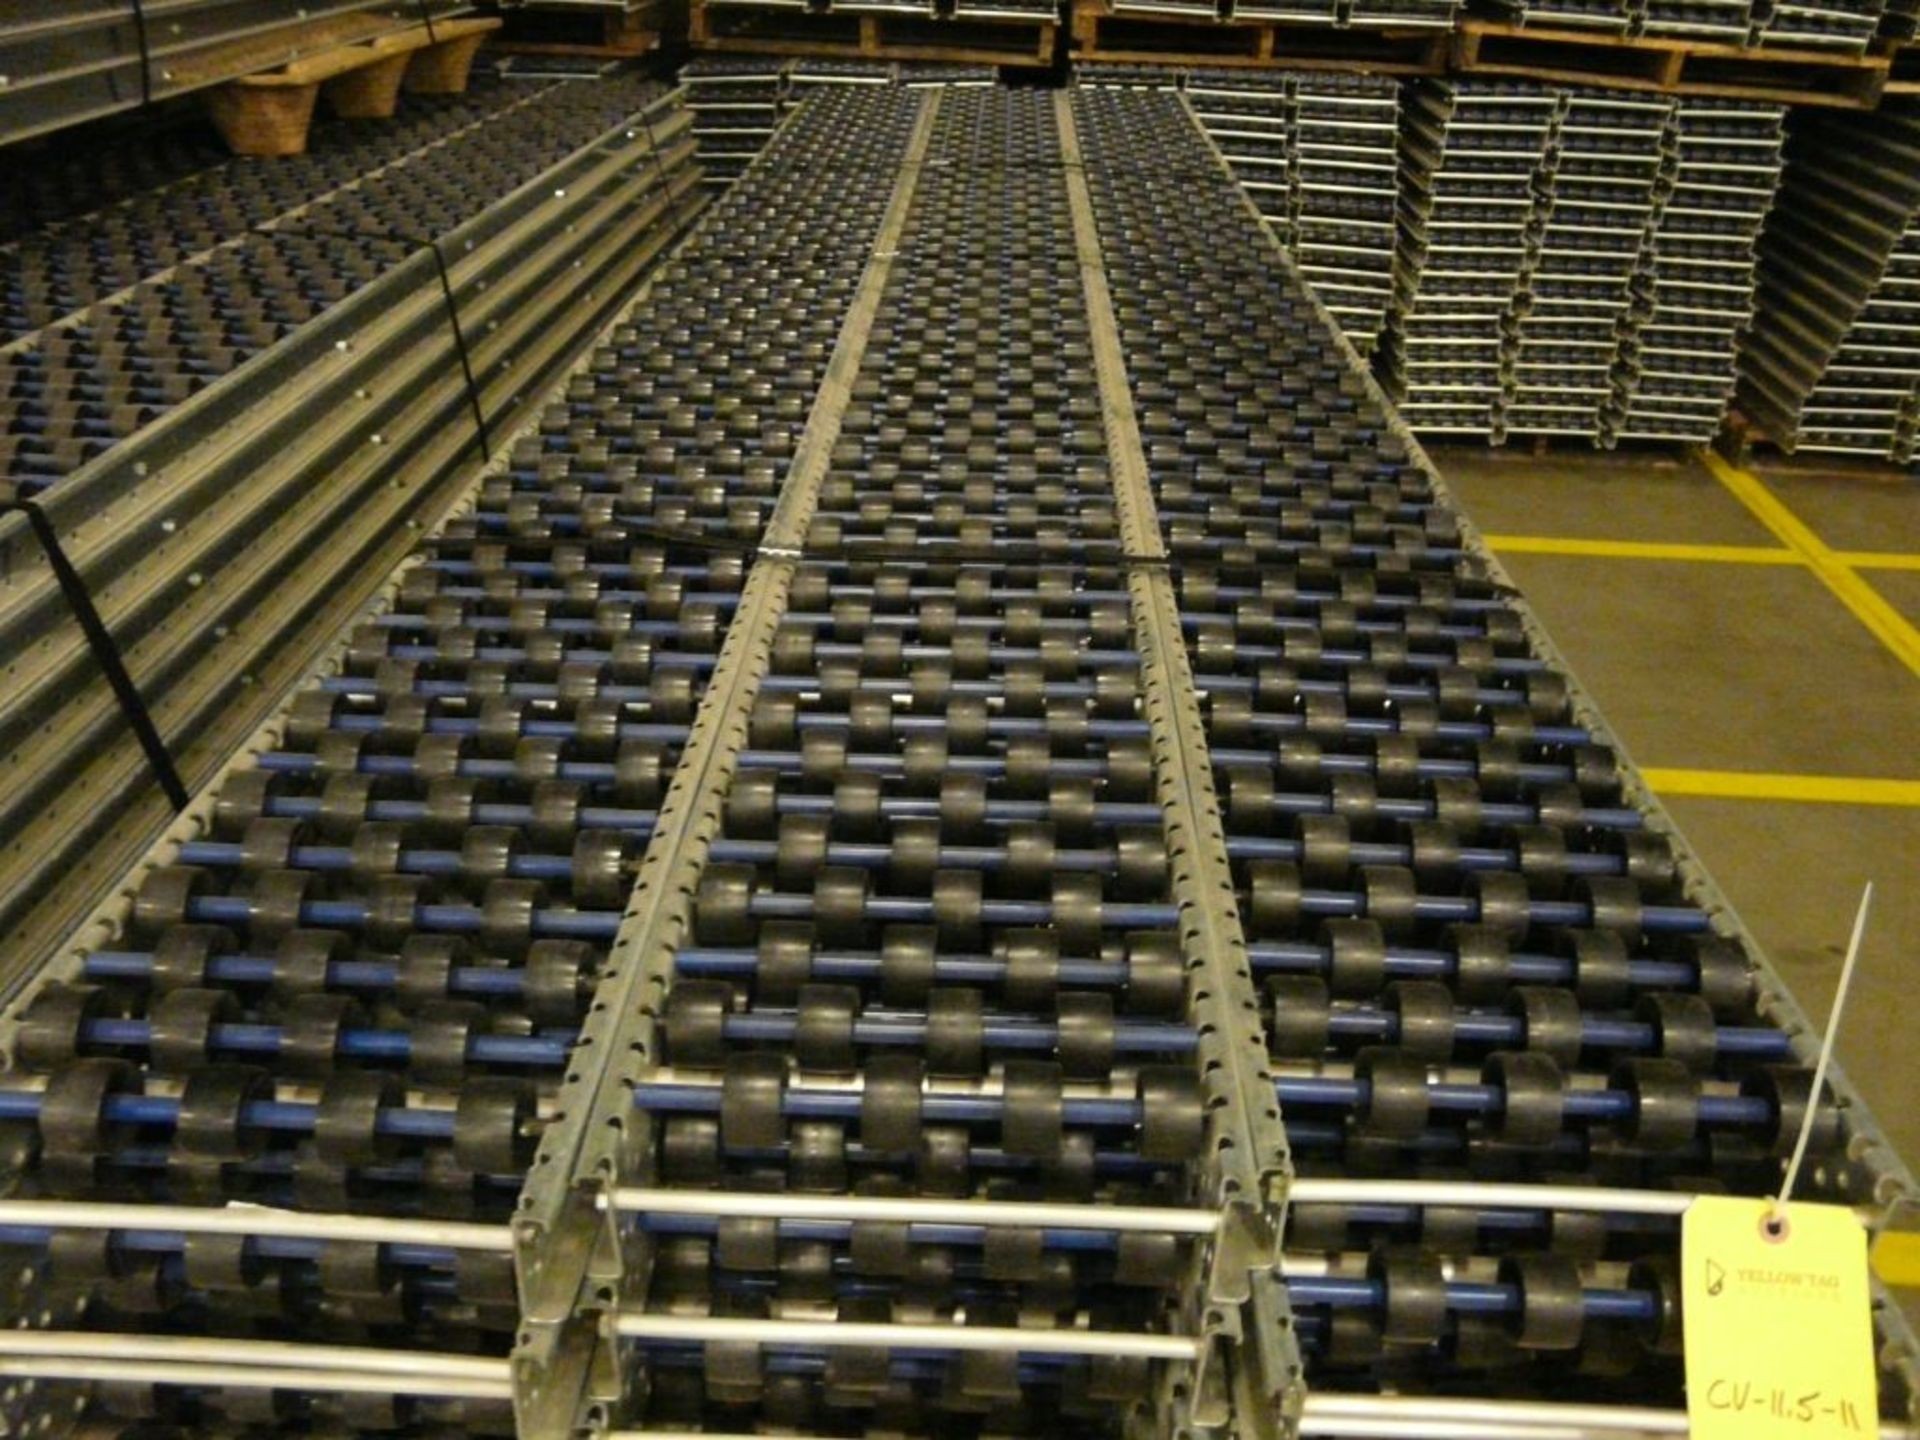 Lot of (90) SpanTrack Wheelbed Carton Flow Conveyors - 11.5'L x 11"W; Tag: 223640 - $30 Lot - Image 3 of 4